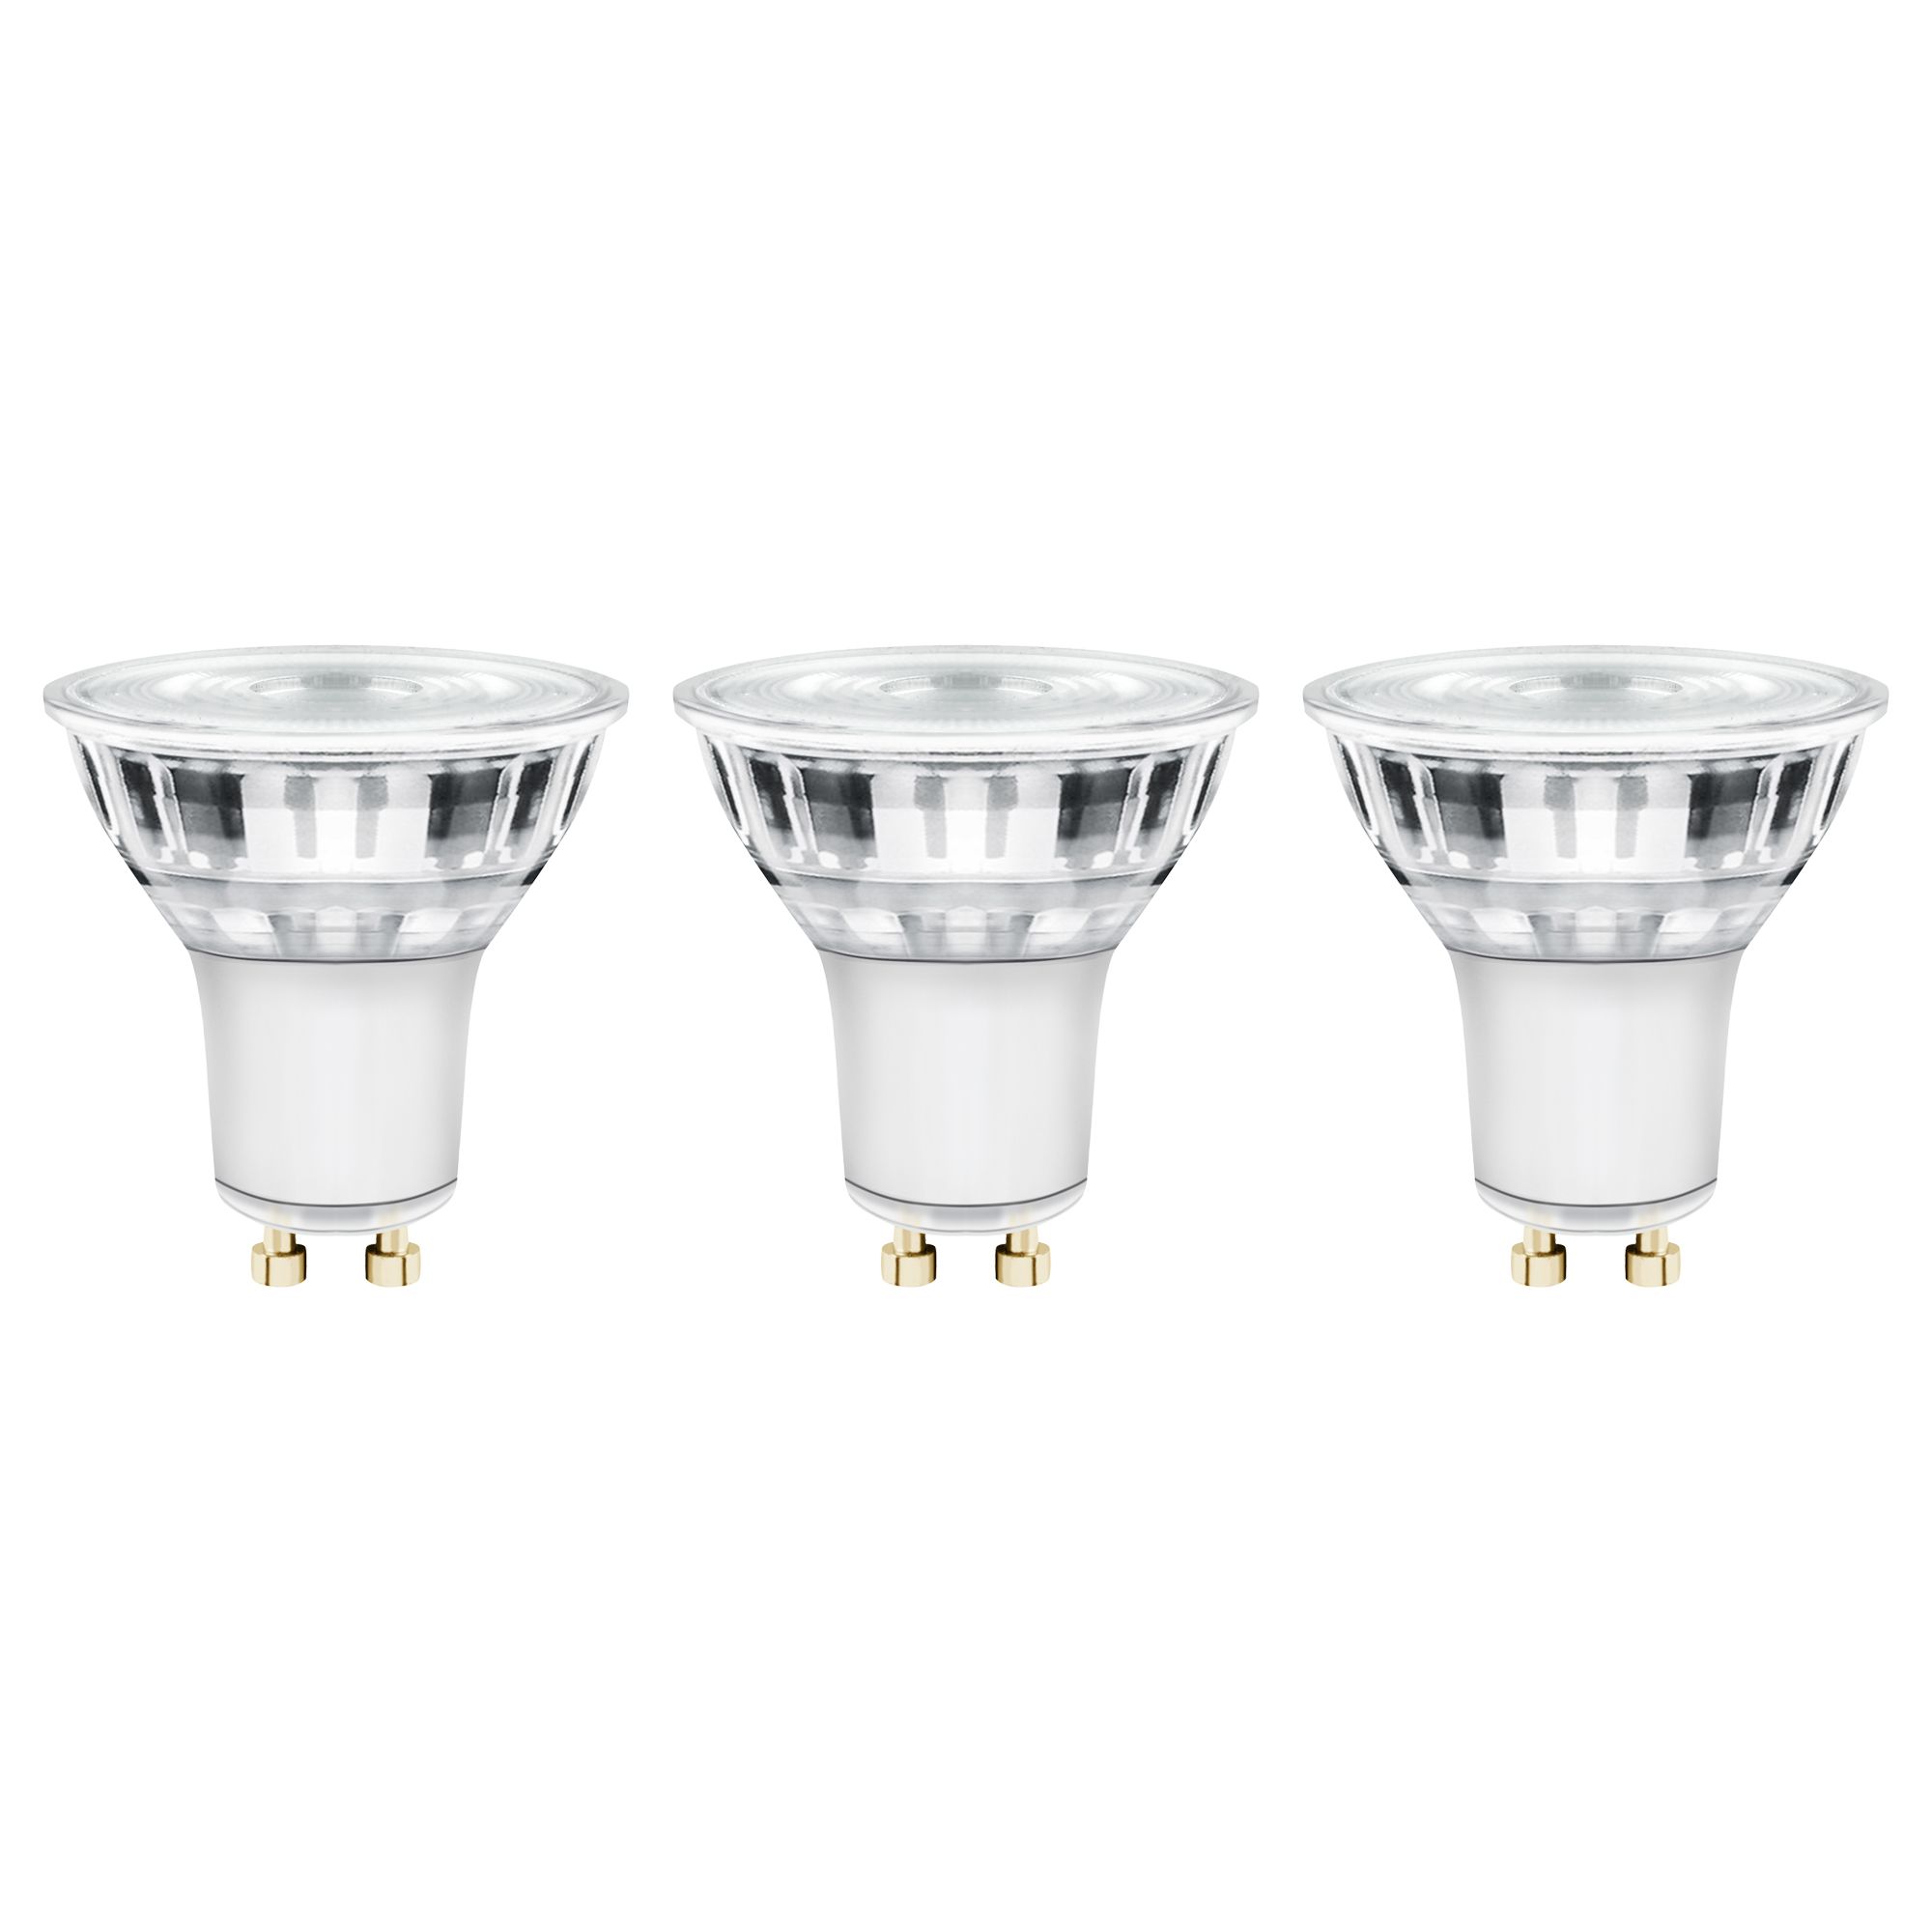 Diall GU10 3.6W 345lm 100° Clear Reflector spot Warm white LED Light bulb, Pack of 3